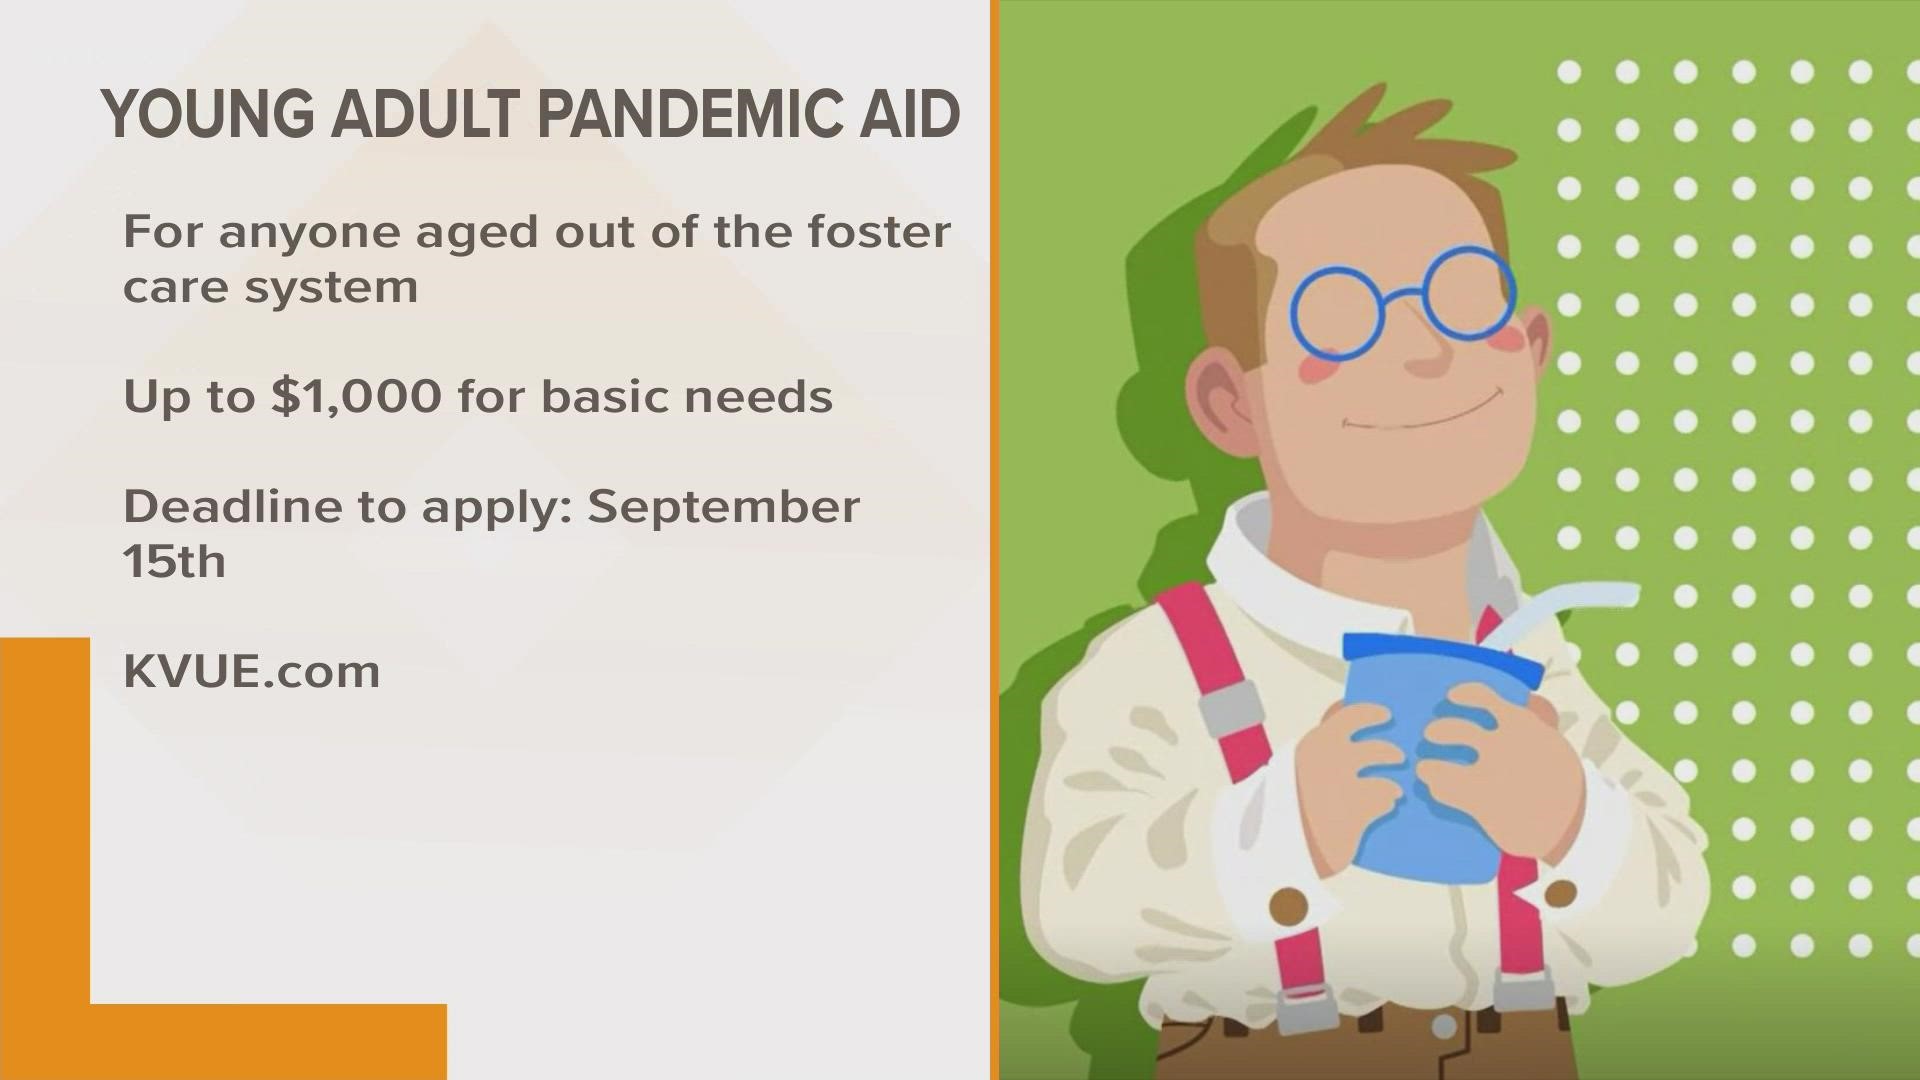 Young Adult Pandemic Aid, or PanAid, is available for young adults who have aged out of the foster care system.